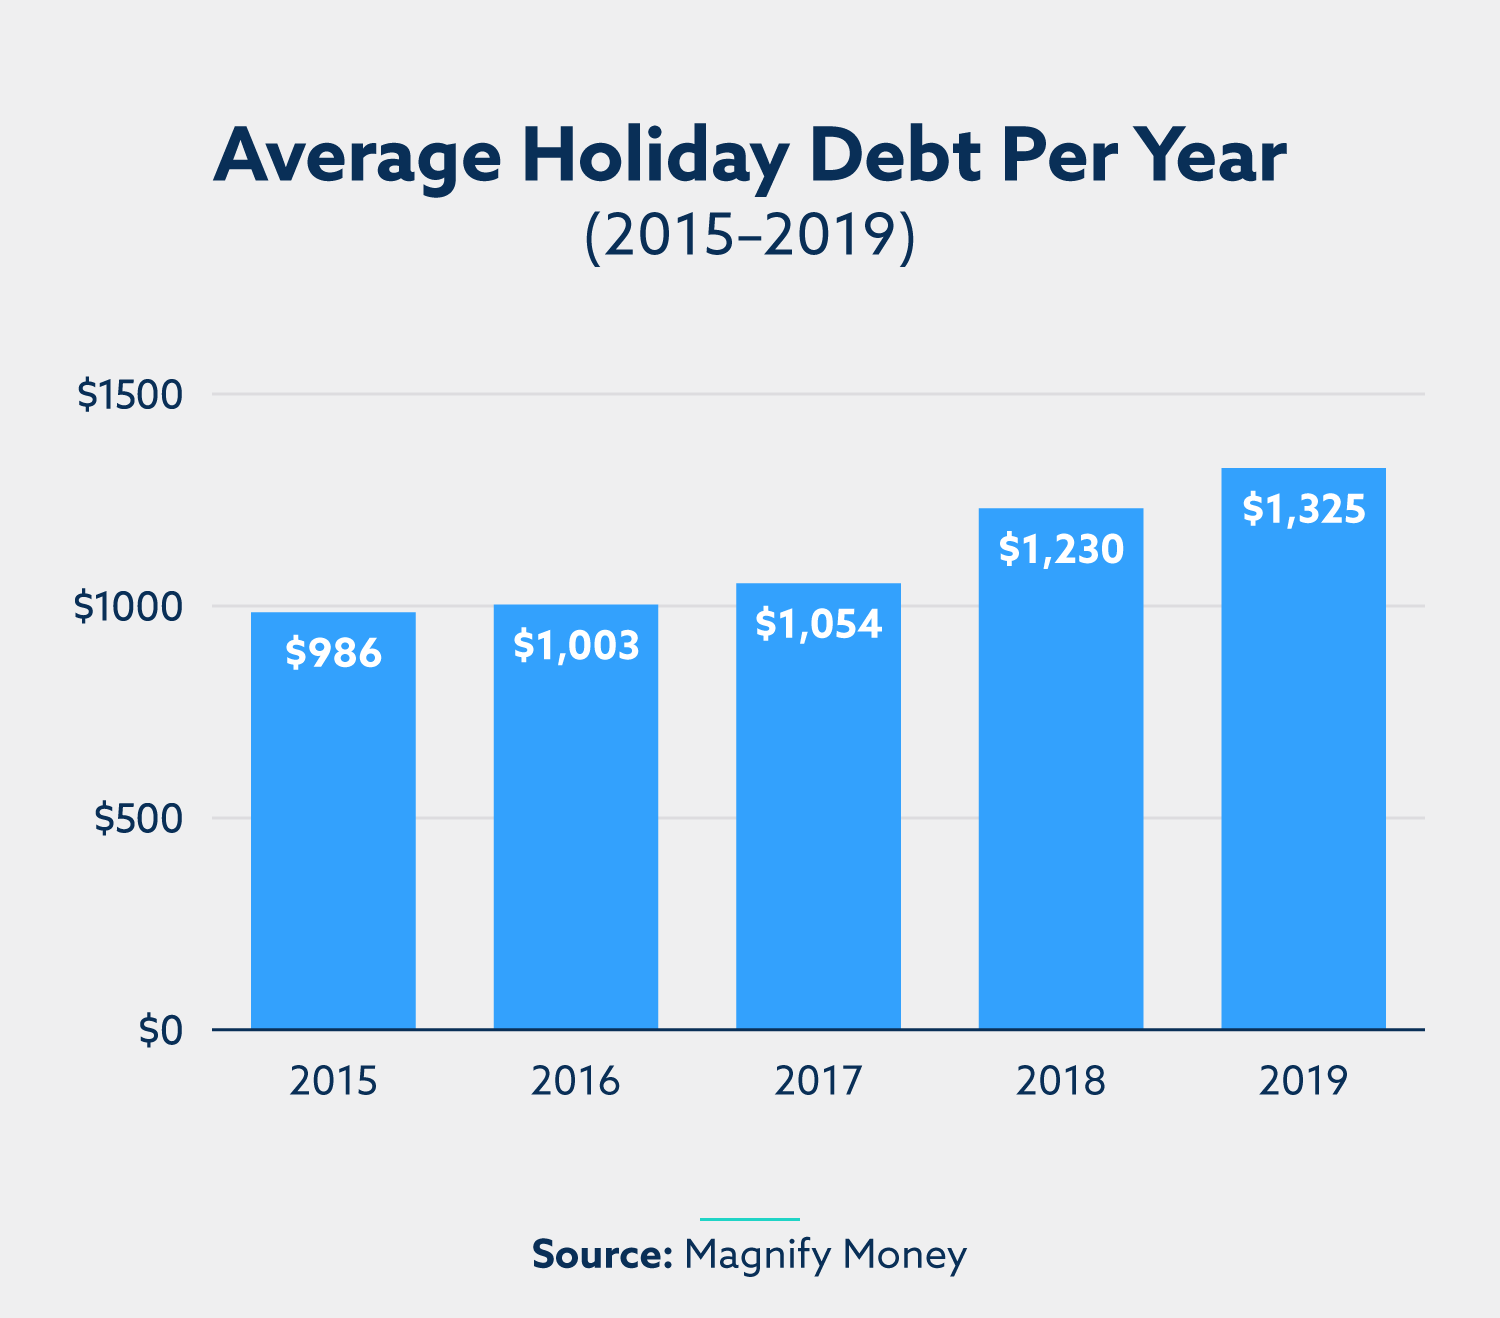 Alt text: Average Holiday Debt Per Year (2015–2019): 2015: $986. 2016: $1,003. 2017: $1,054. 2018: $1,230. 2019: $1,325. Source: Magnify Money